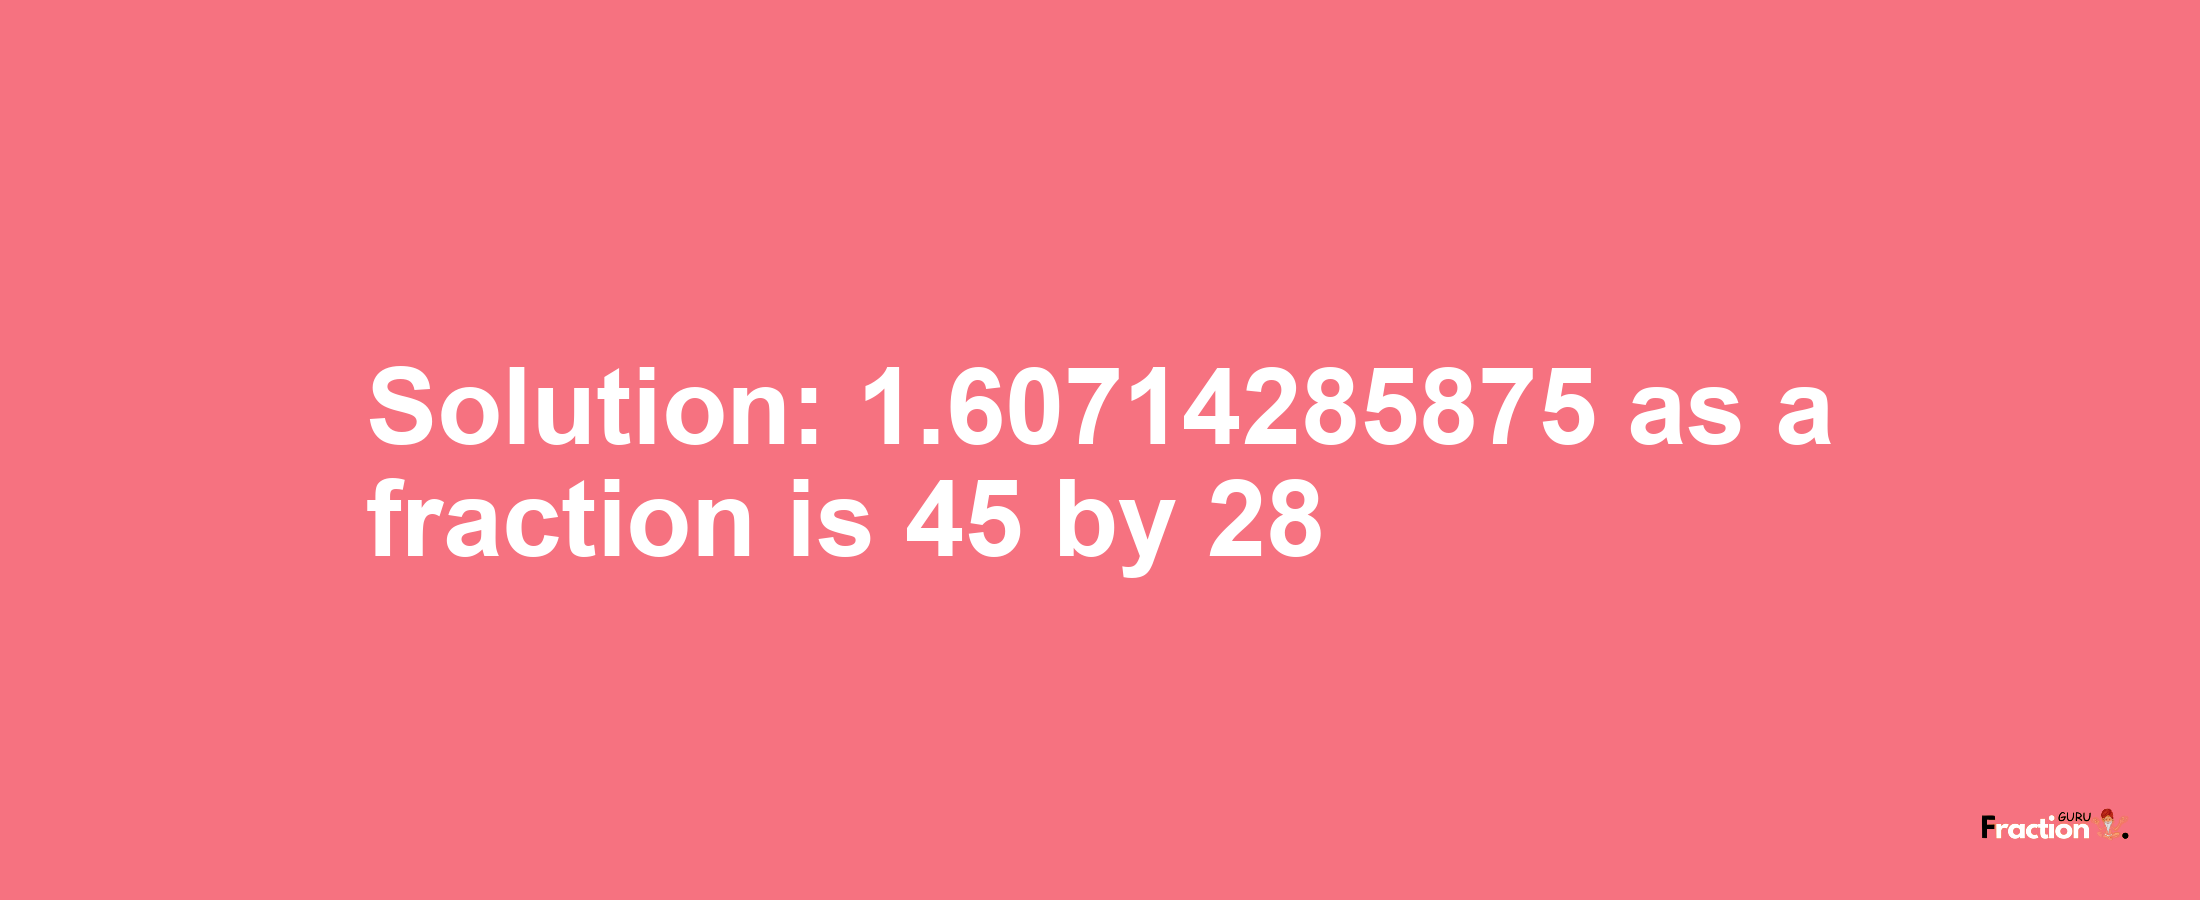 Solution:1.60714285875 as a fraction is 45/28